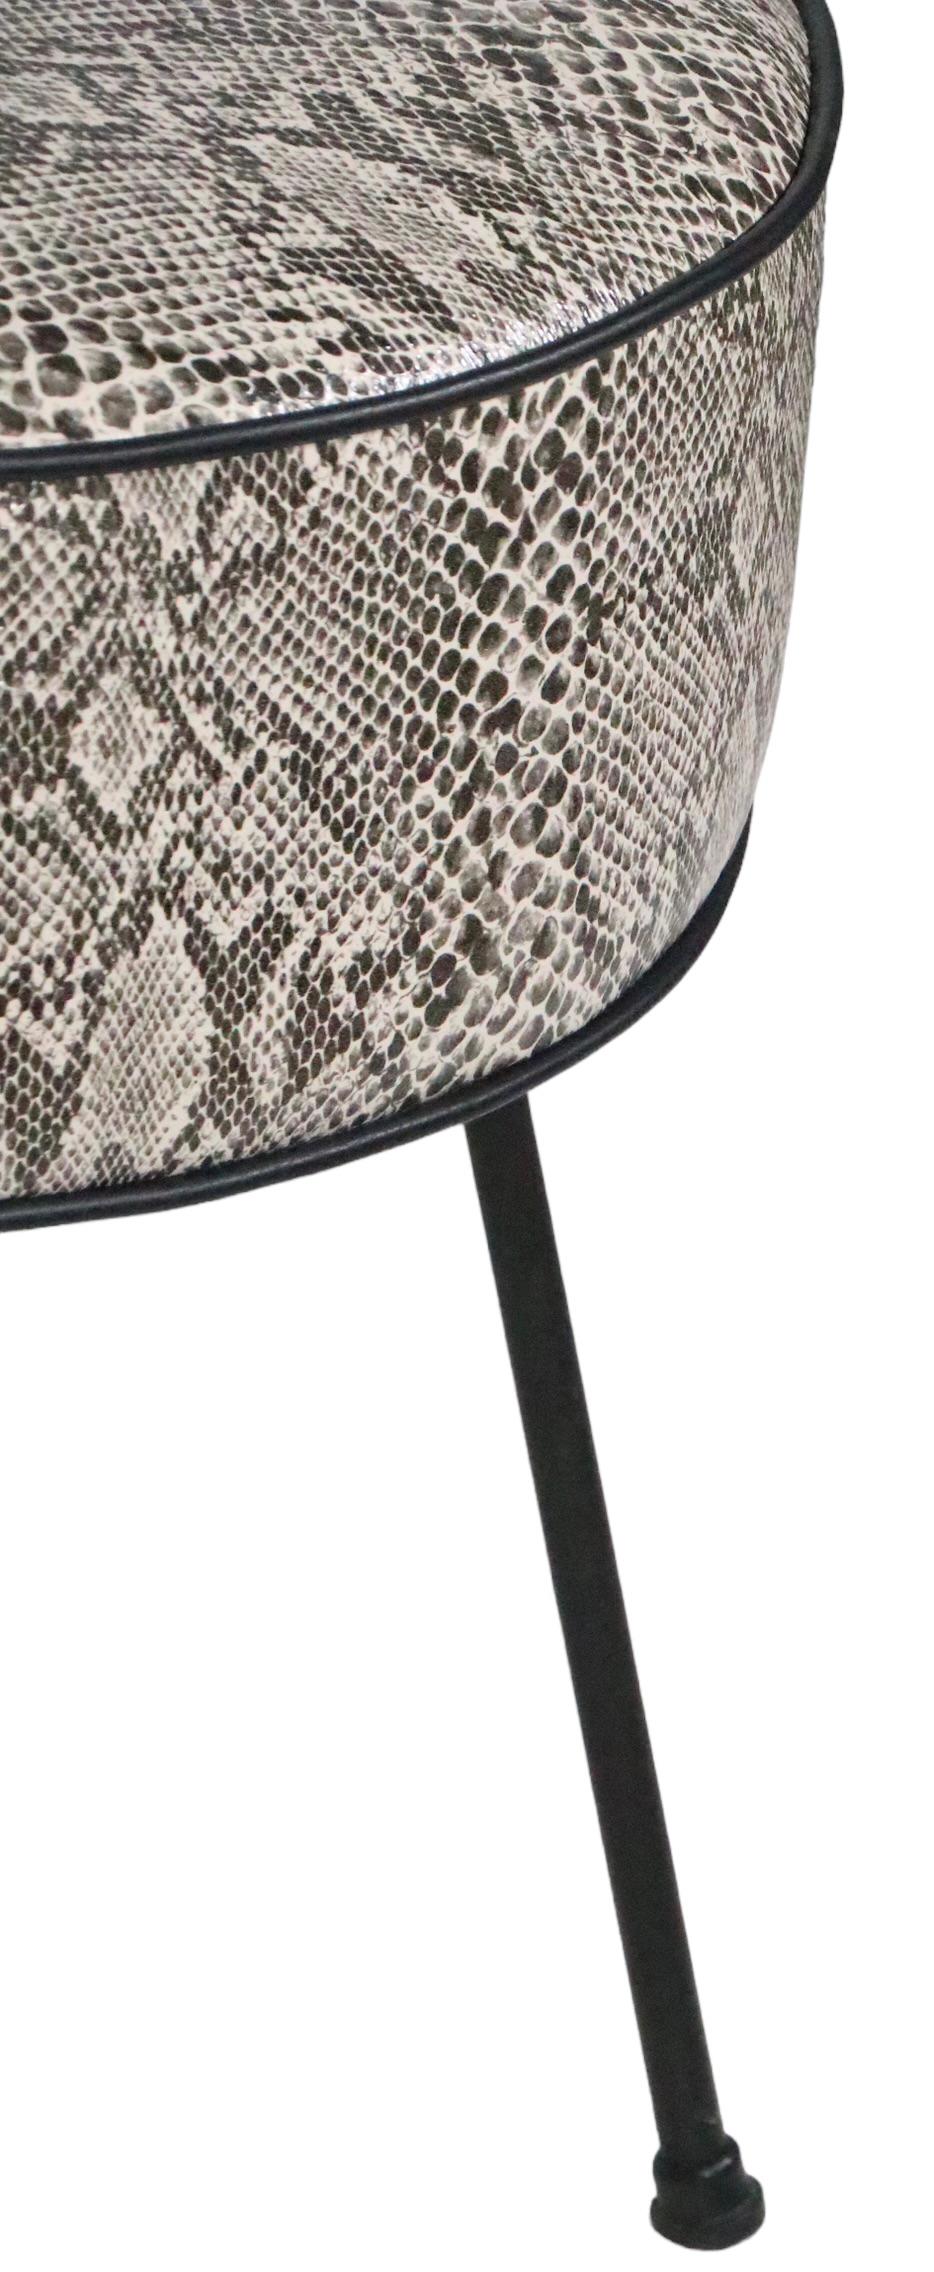 American Mid Century Foot Stool Pouf Ottoman Reupholstered in Black and White Faux Python